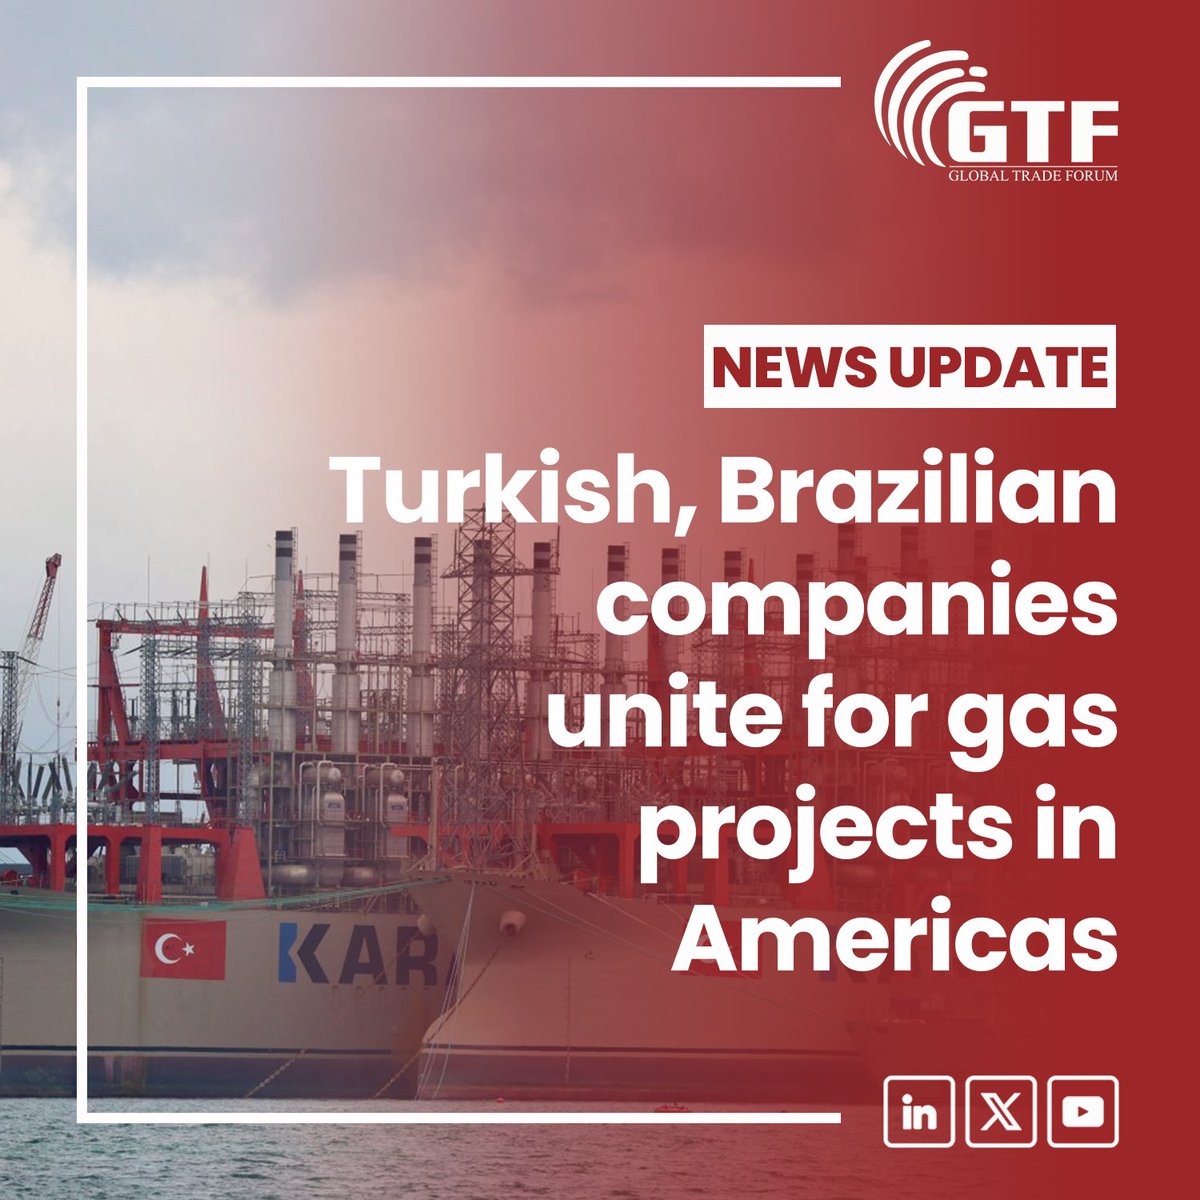 Türkiye's floating energy supplier Karpowership has signed a deal with Brazilian state oil firm Petrobras to combine their expertise in the natural gas and energy sectors, the company announced Tuesday.

#TürkiyeTrade #GTF2024 #GlobalTradeForum #EUTradeRelations #EuropeEconomy